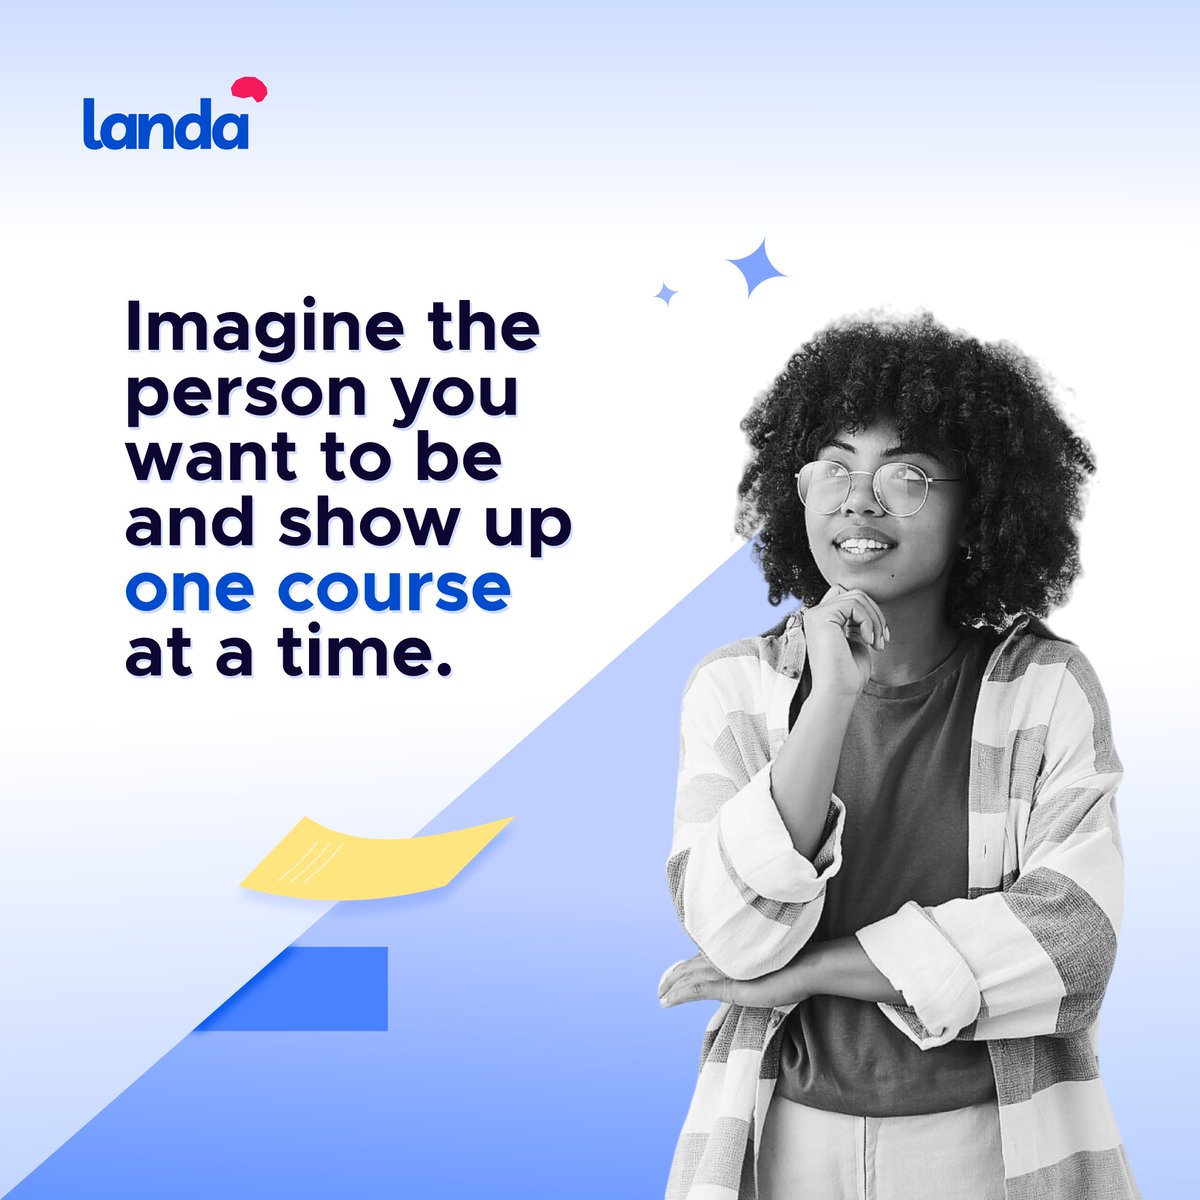 Show up and start building the life you want with Landa. Enjoy access to courses from top universities and experience learning that works on landalearn.com

#WaitlistOpen #Learningthatworks #onlinelearning #elearning #topuniversities #EdTech